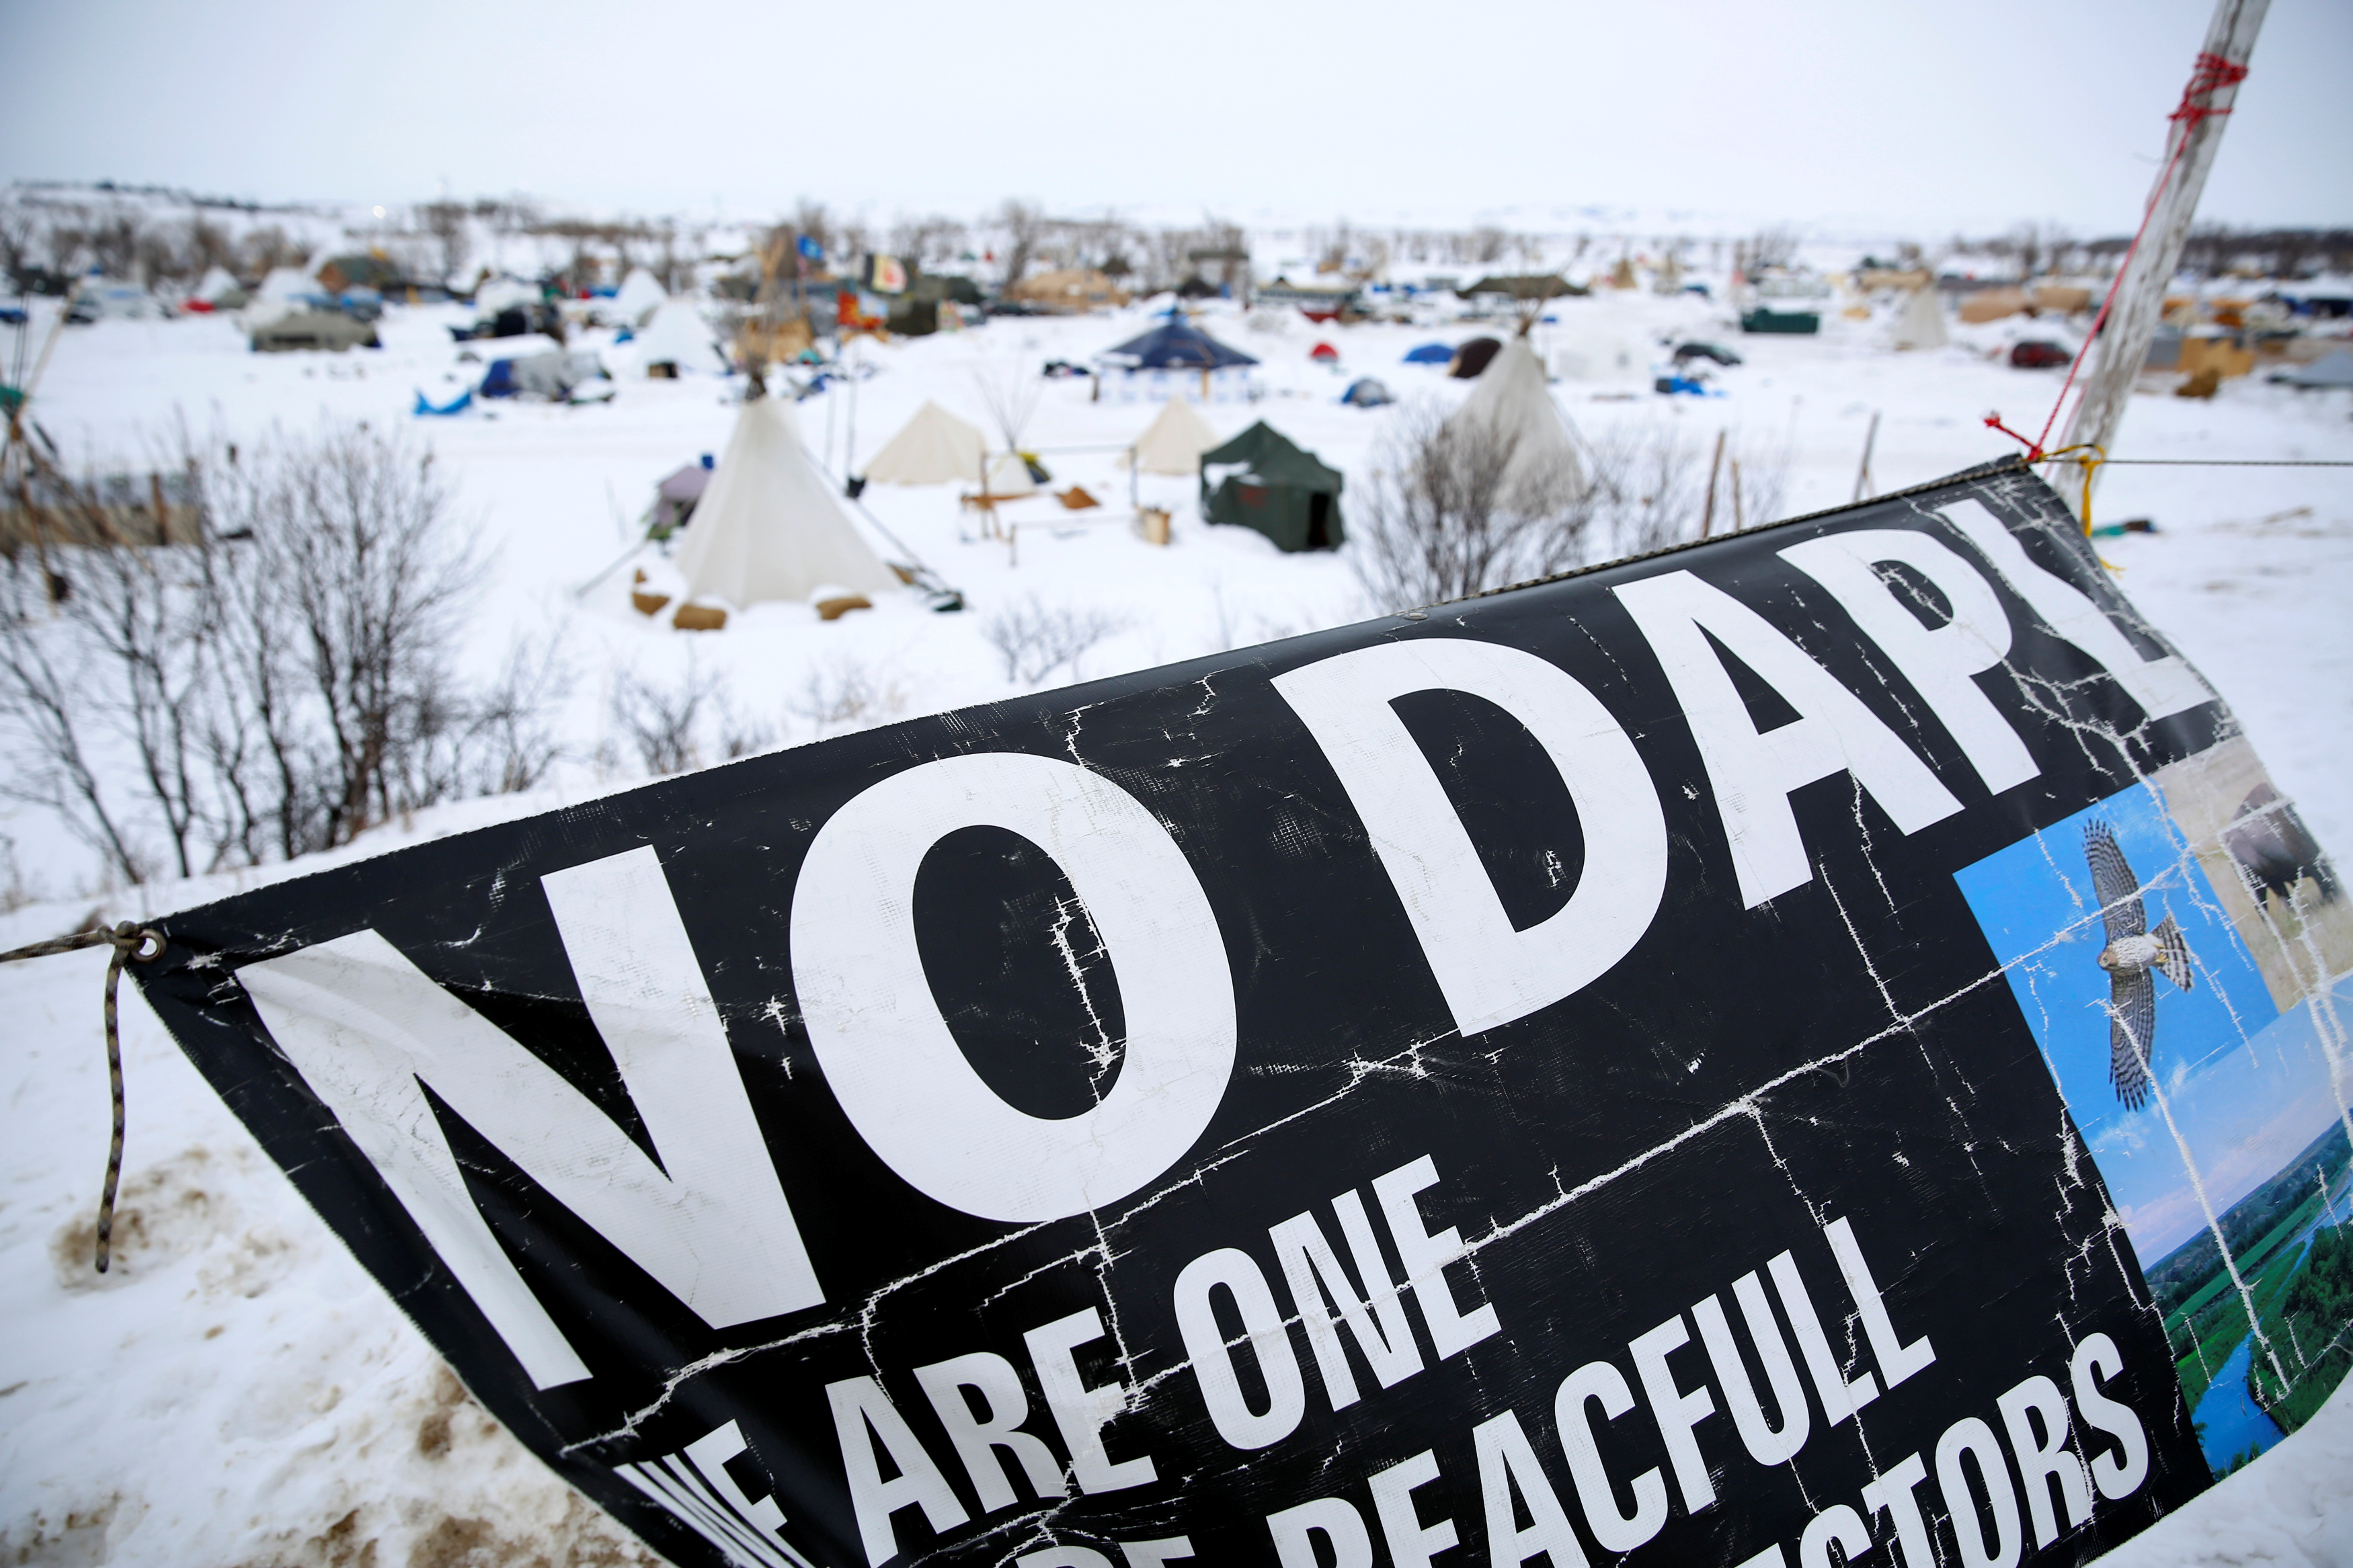 A banner flies in the Dakota Access Pipeline protest camp near Cannon Ball, North Dakota. REUTERS/Terray Sylvester TPX IMAGES OF THE DAY